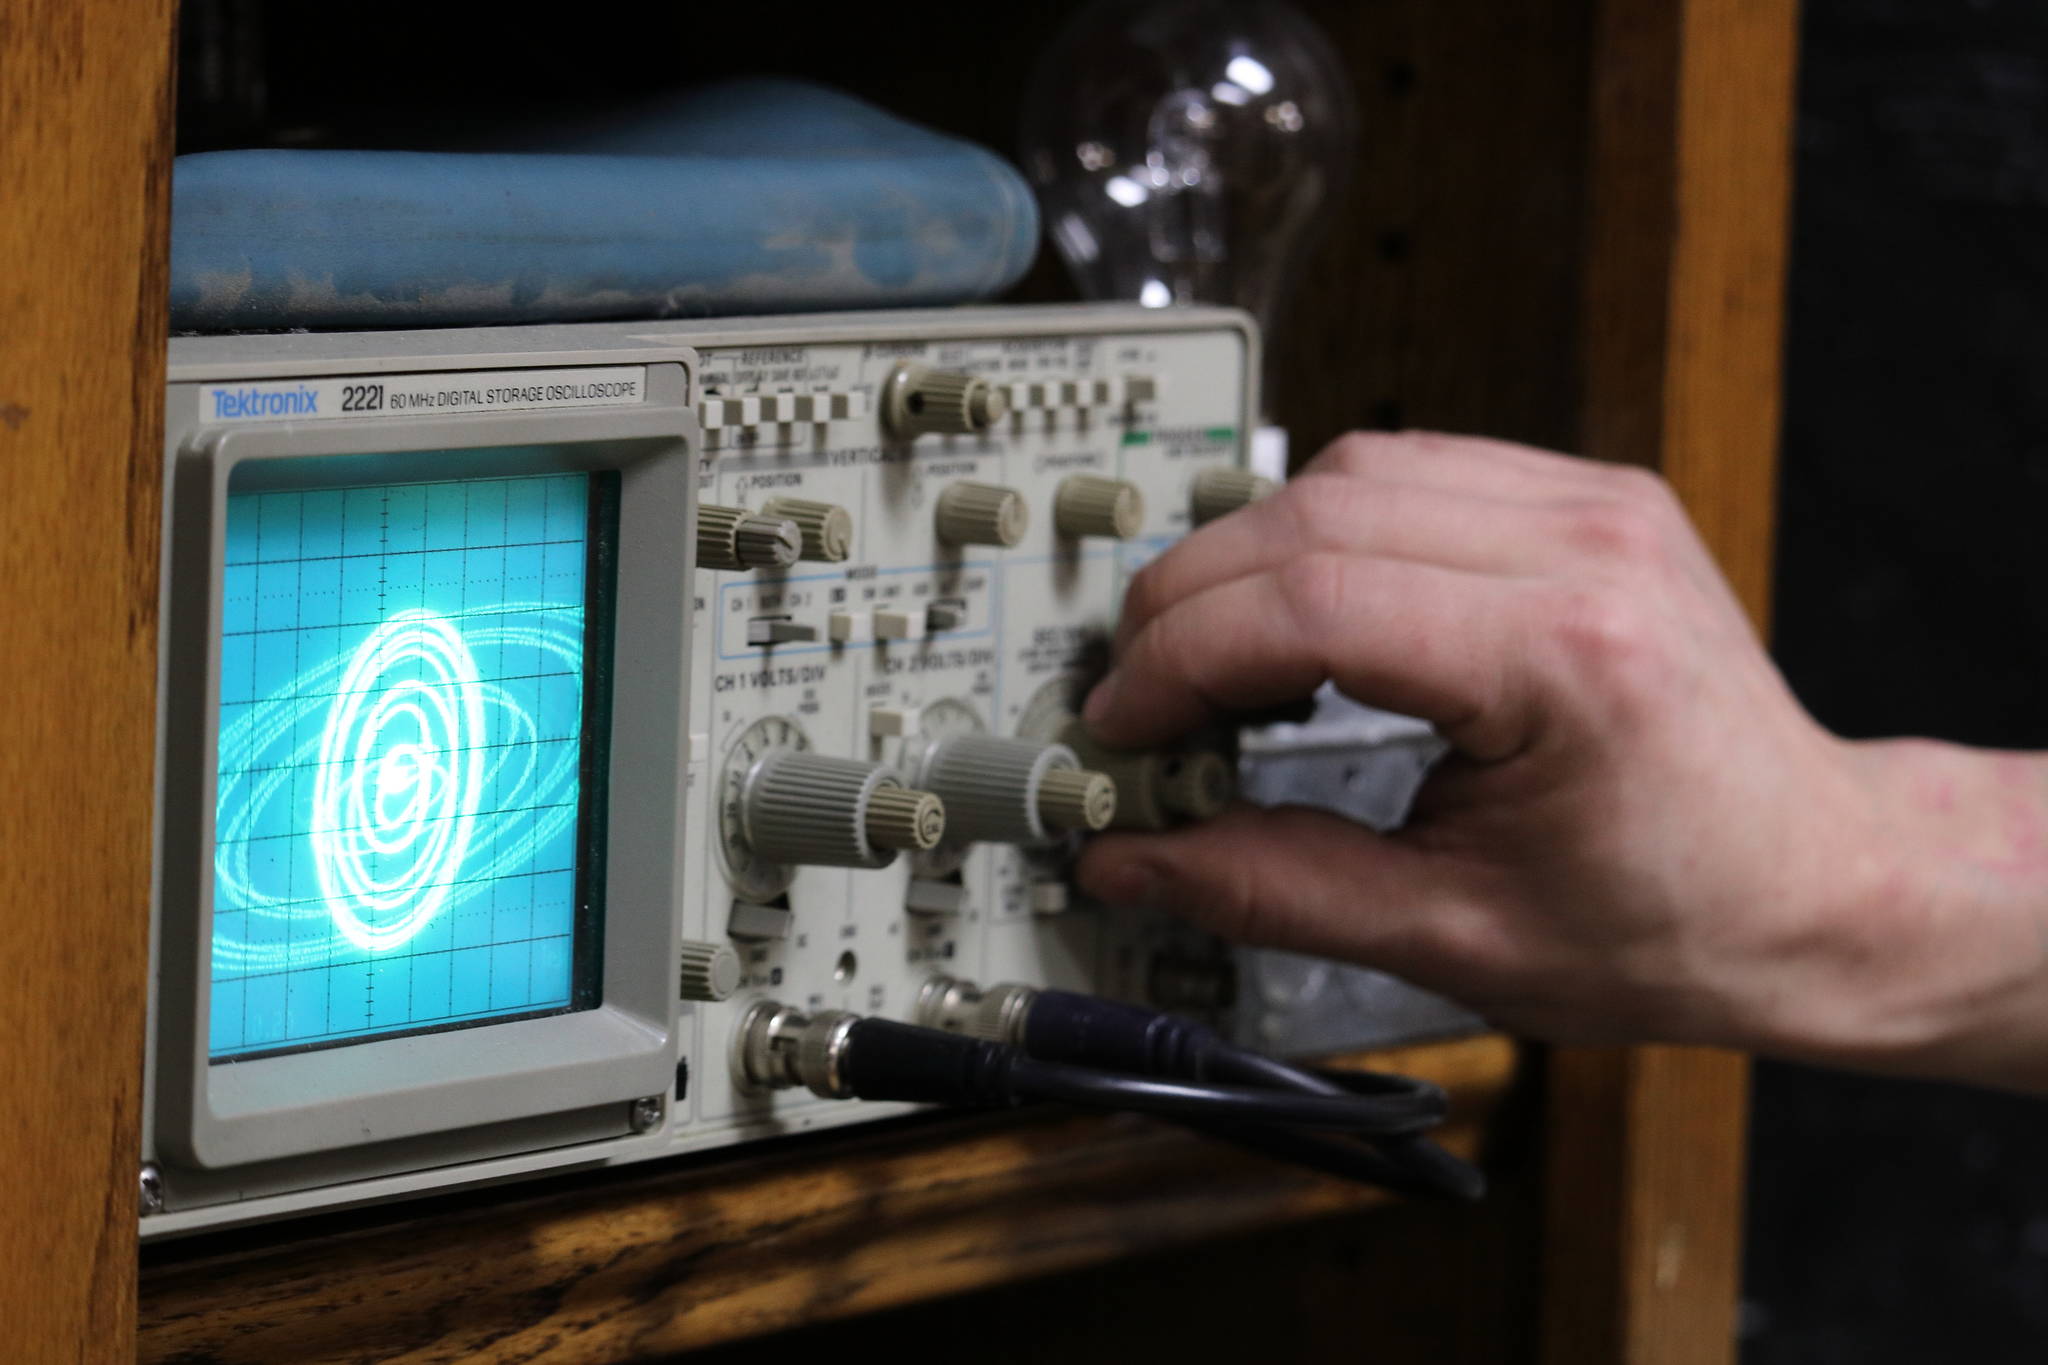 Nano Brooks twists the dial of an oscilloscope — a device that uses electrical signals from sound waves to create images— while the oscilloscope shows an image that looks a lot like an exploding Death Star from “Star Wars.” (Ben Hohenstatt / Juneau Empire)